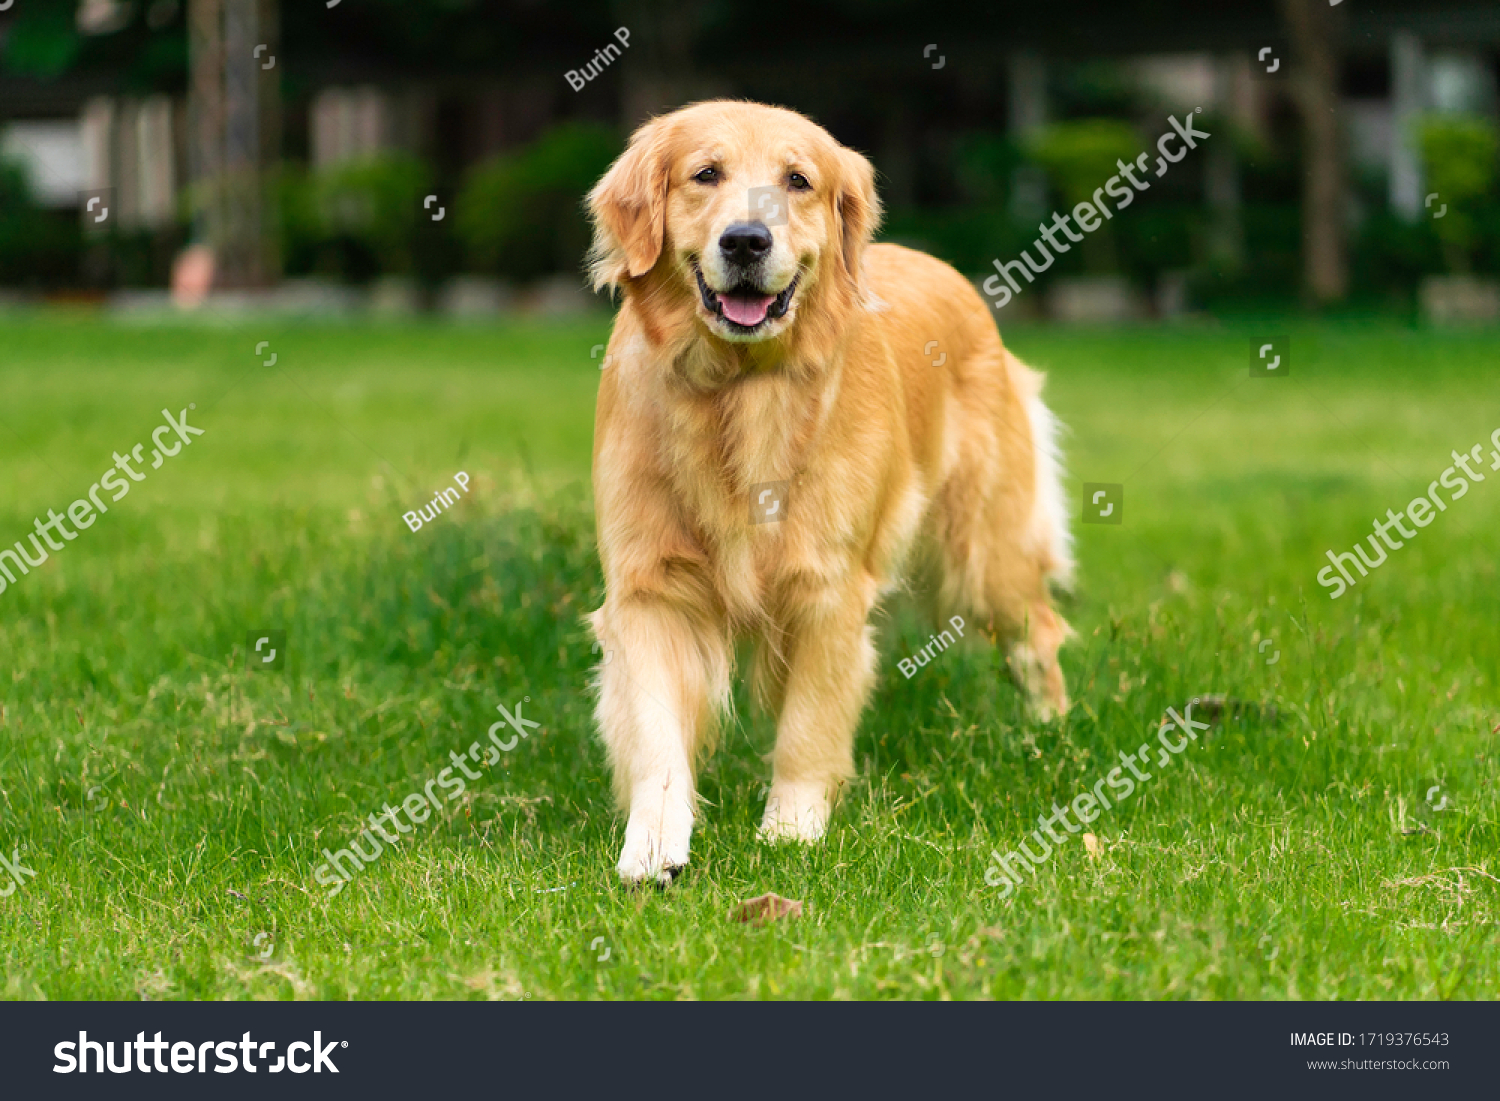 Smiling Face Cute Lovely Adorable Golden Retriever Dog Walking in Fresh Green Grass Lawn in the Park  #1719376543